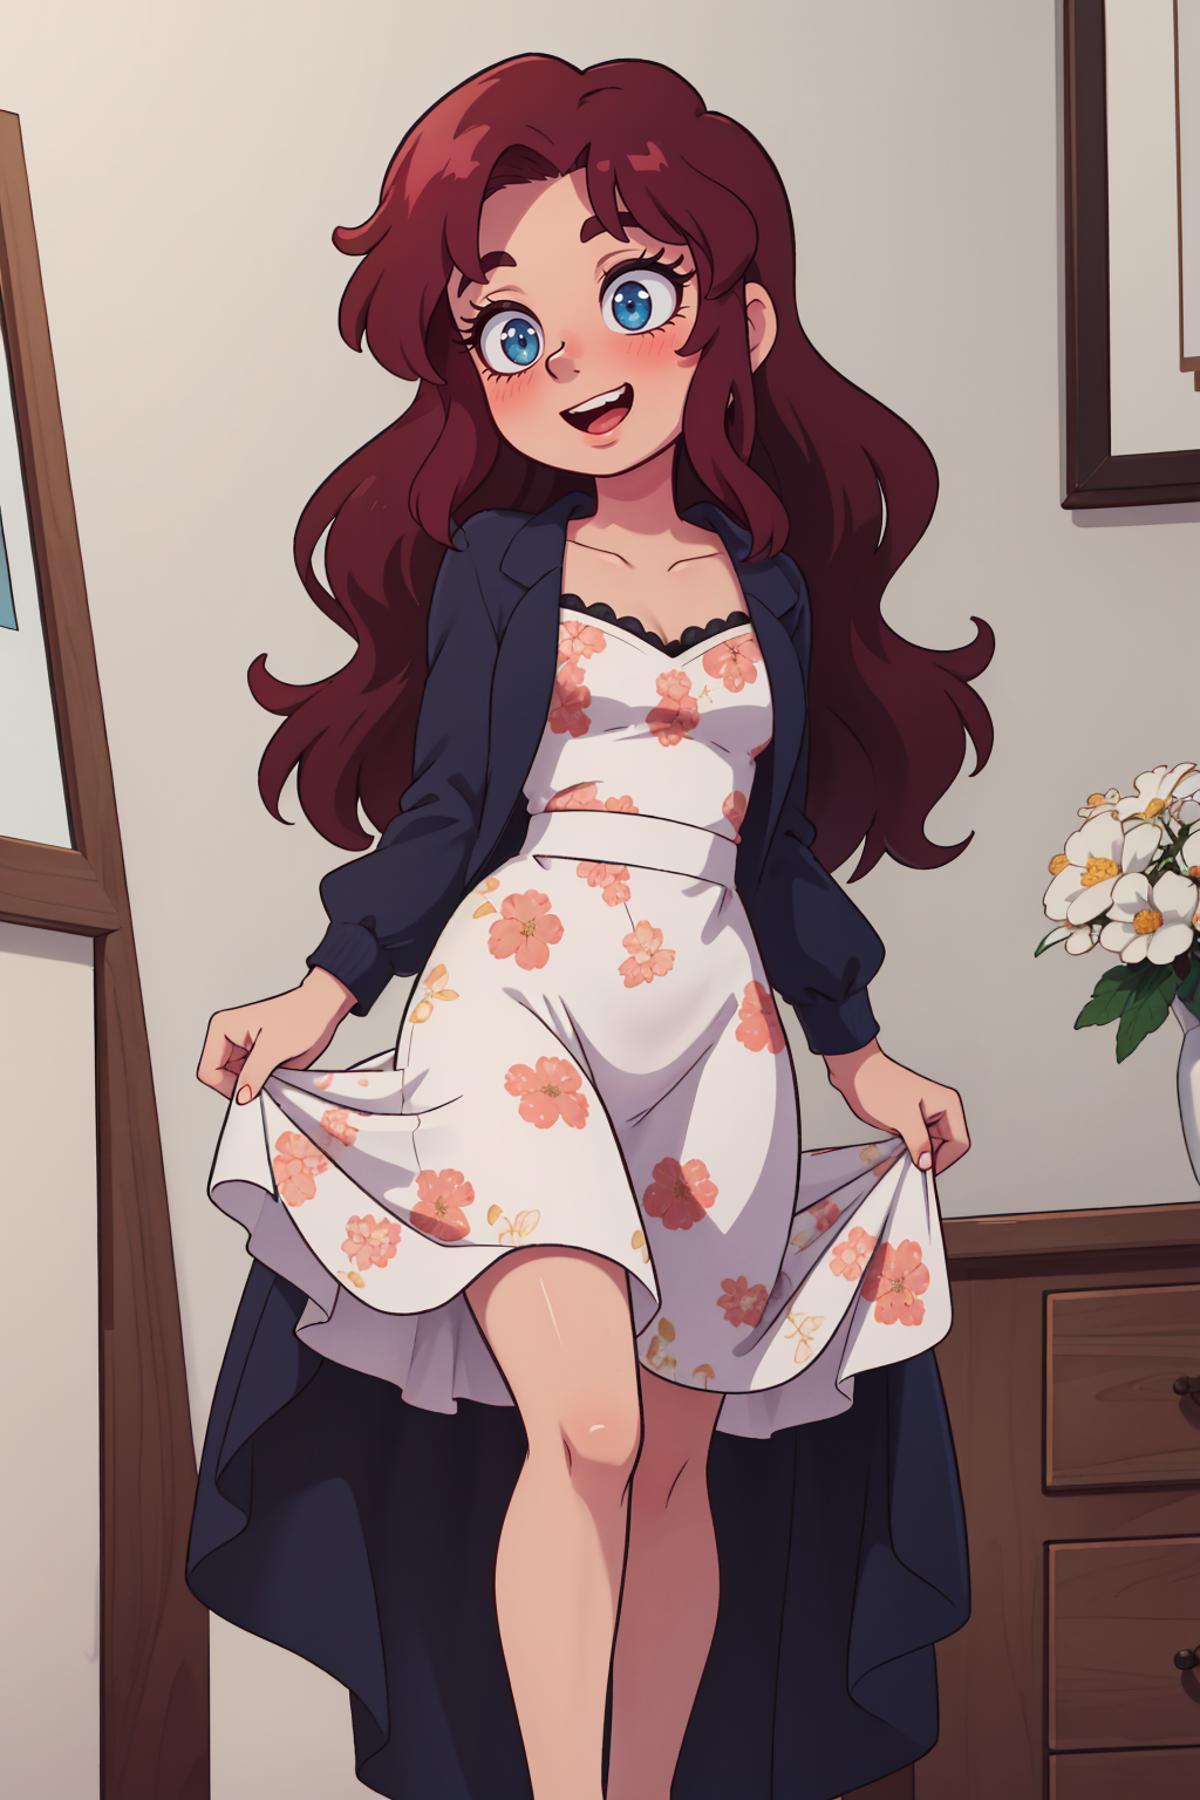 A cartoon girl with long red hair wearing a white dress with flowers.